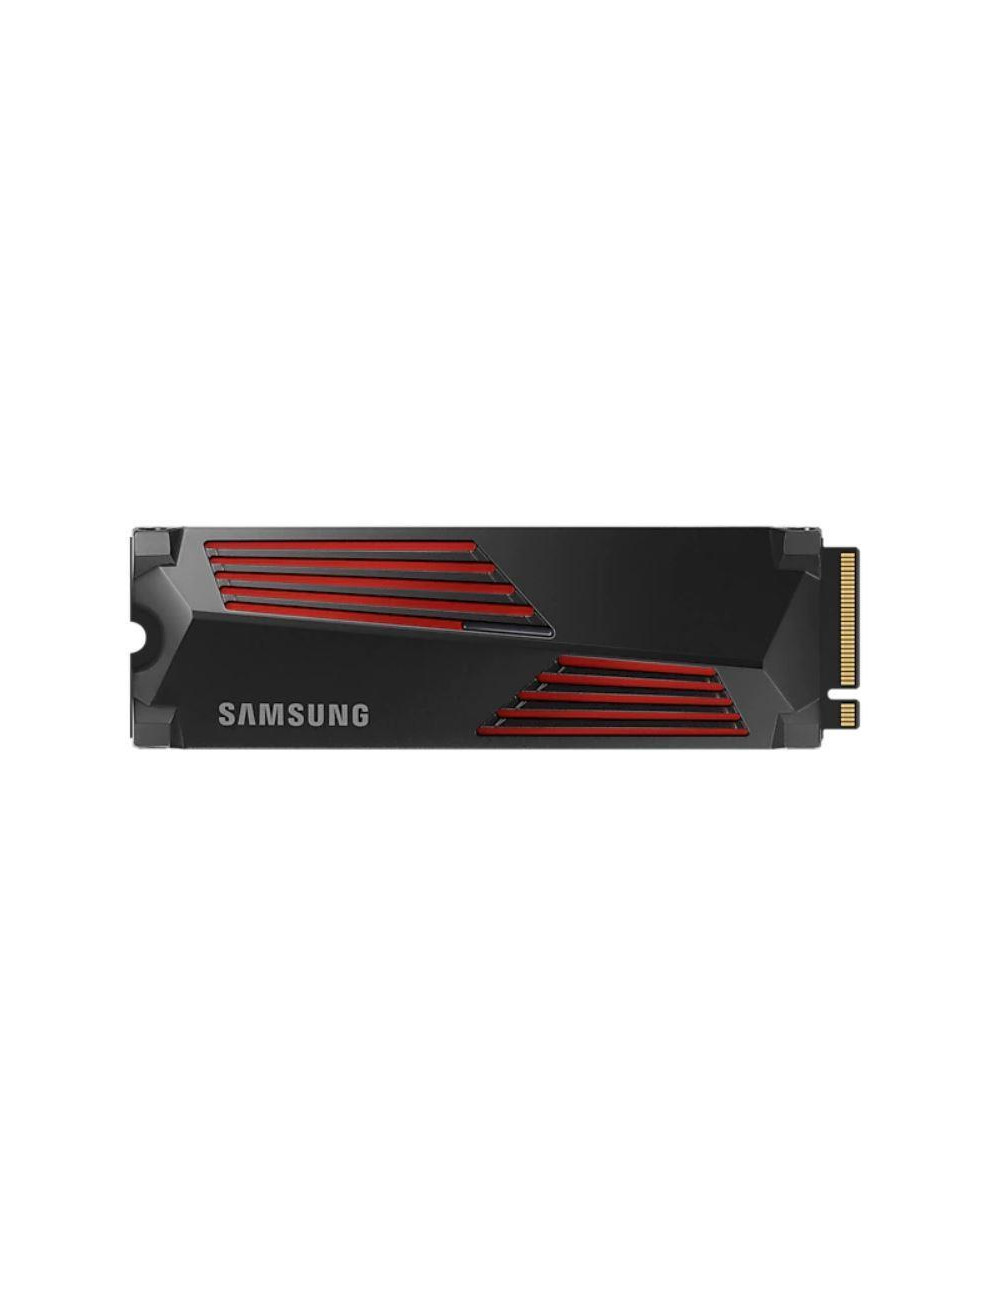 SAMSUNG 990 PRO 4 To SSD NVMe M.2 PCIe 4.0 7450 Mo/S